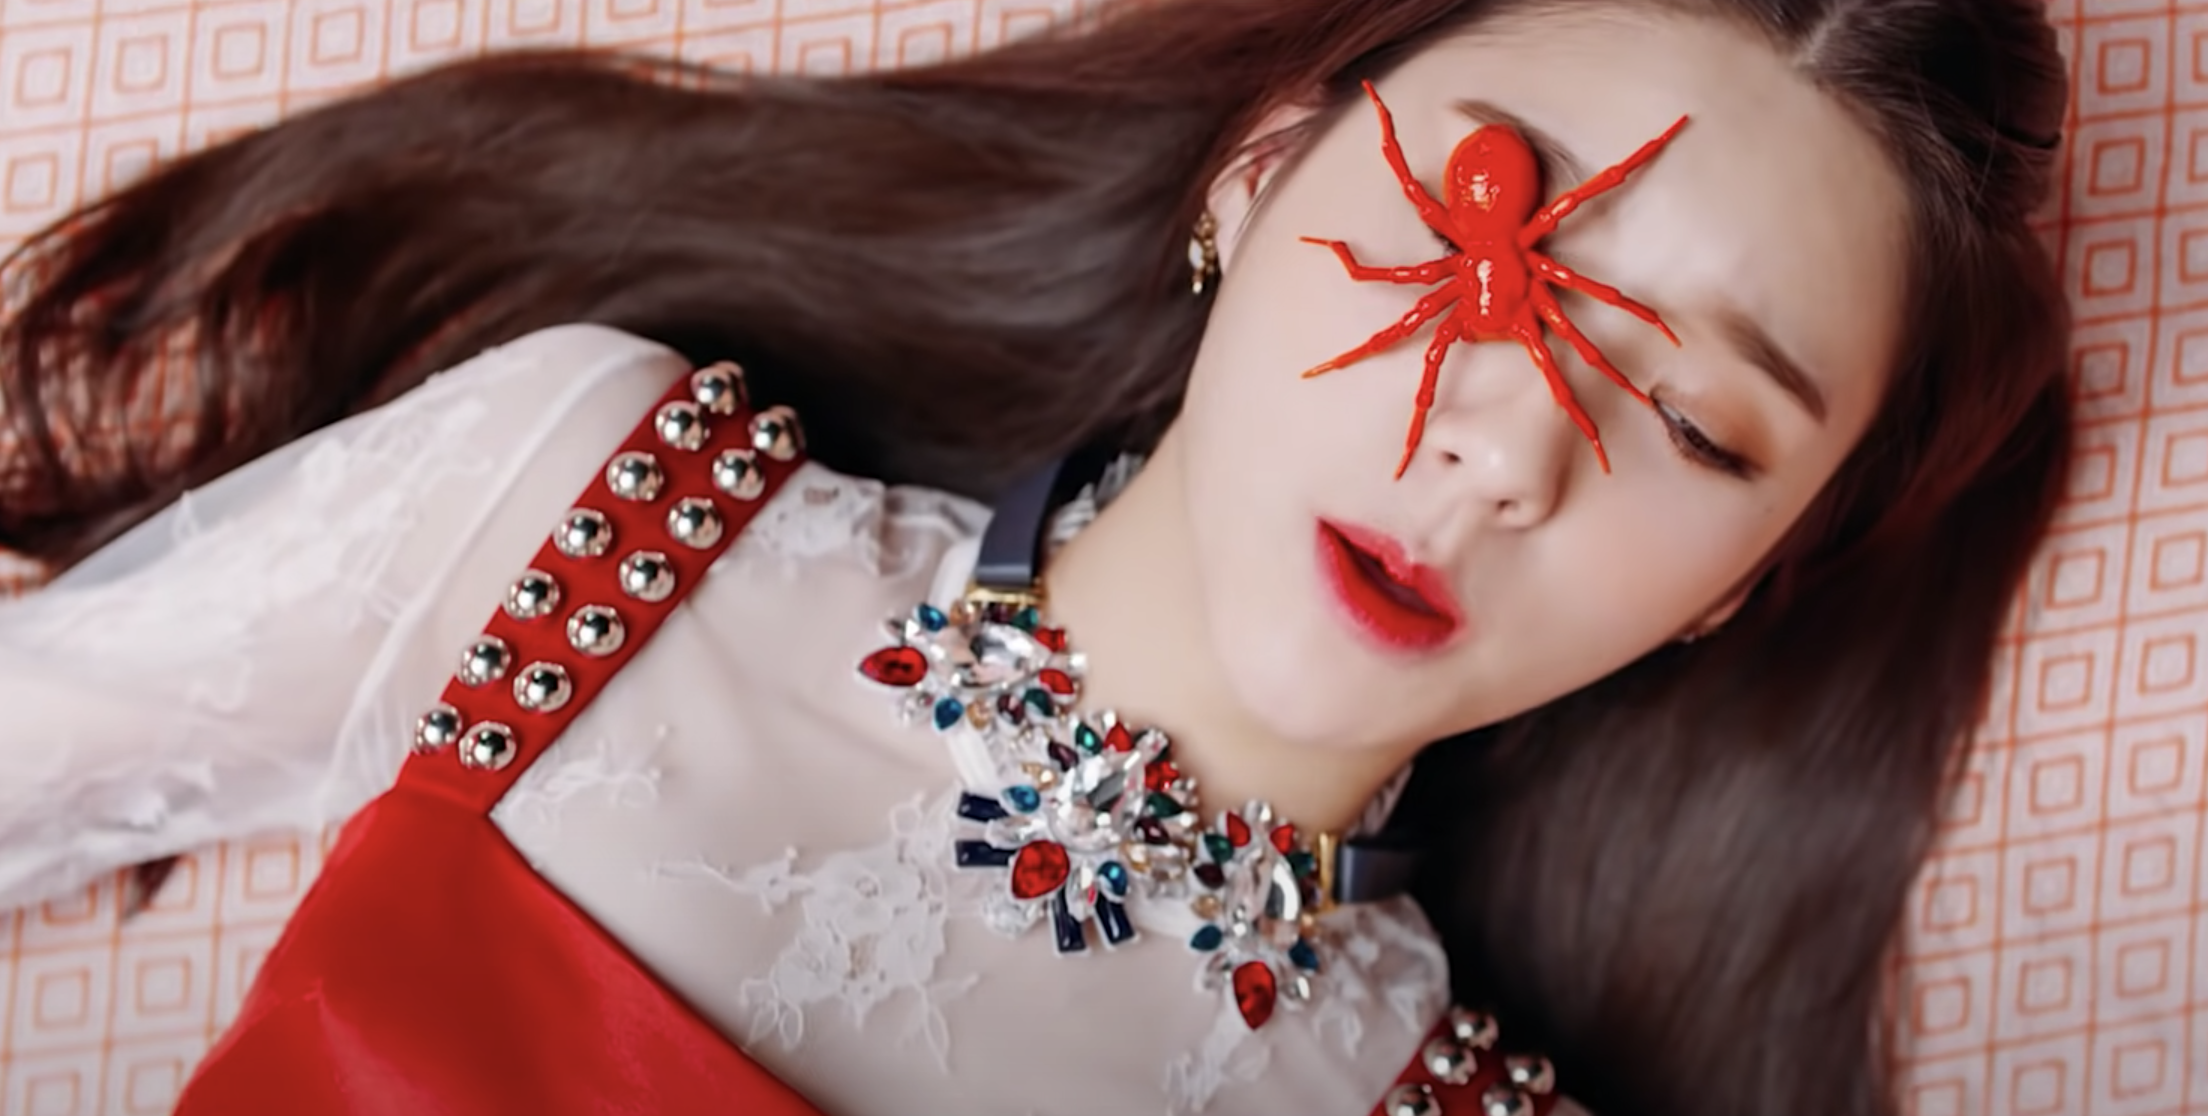 HeeJin lies on the floor with a fake spider covering one of her eyes